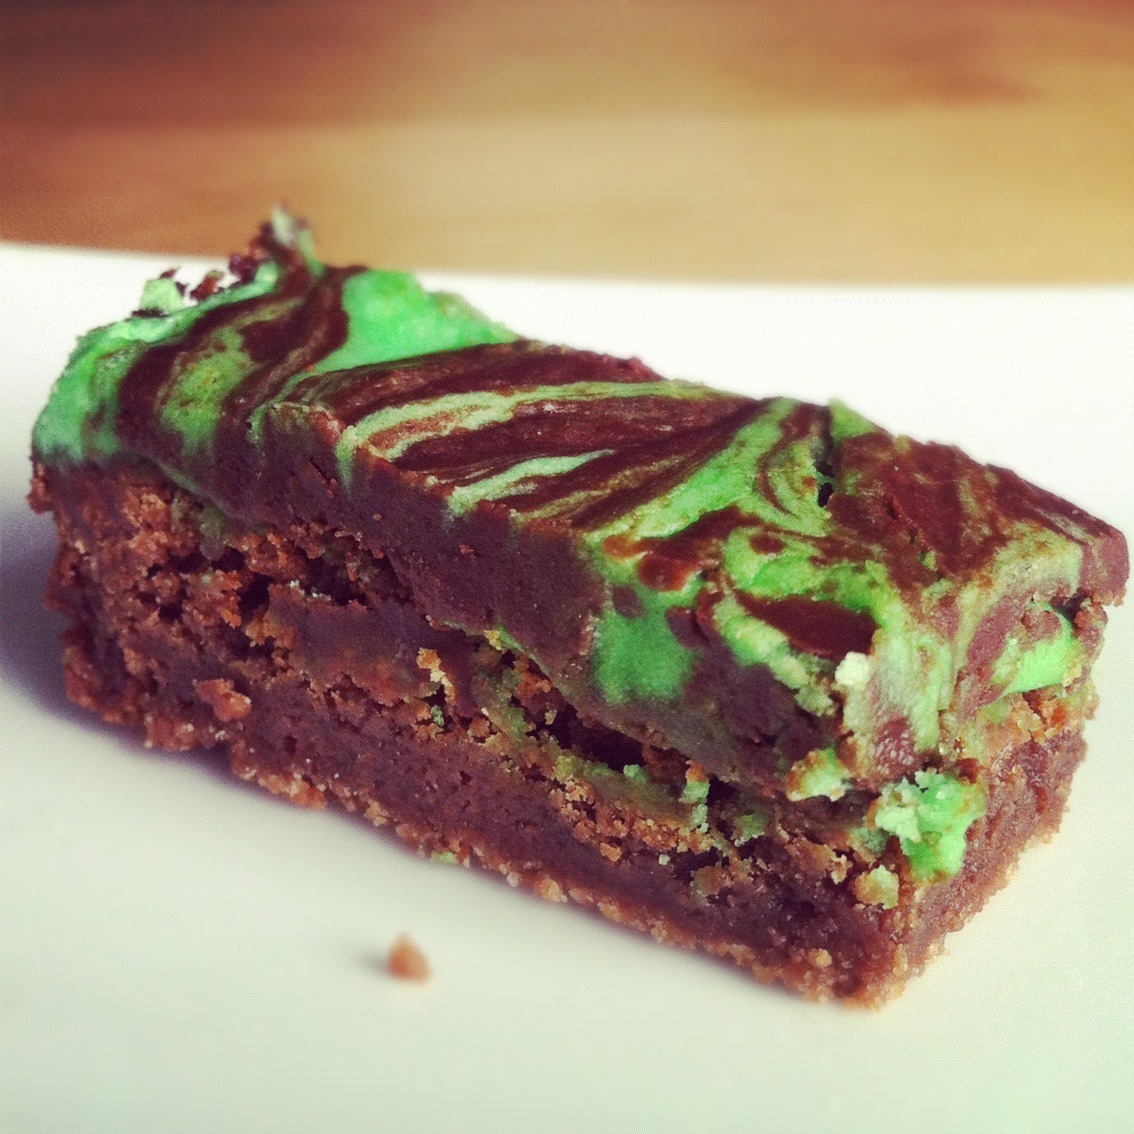 MINT BROWNIESWhy do I torture myself? Chocolate and mint are one of my 